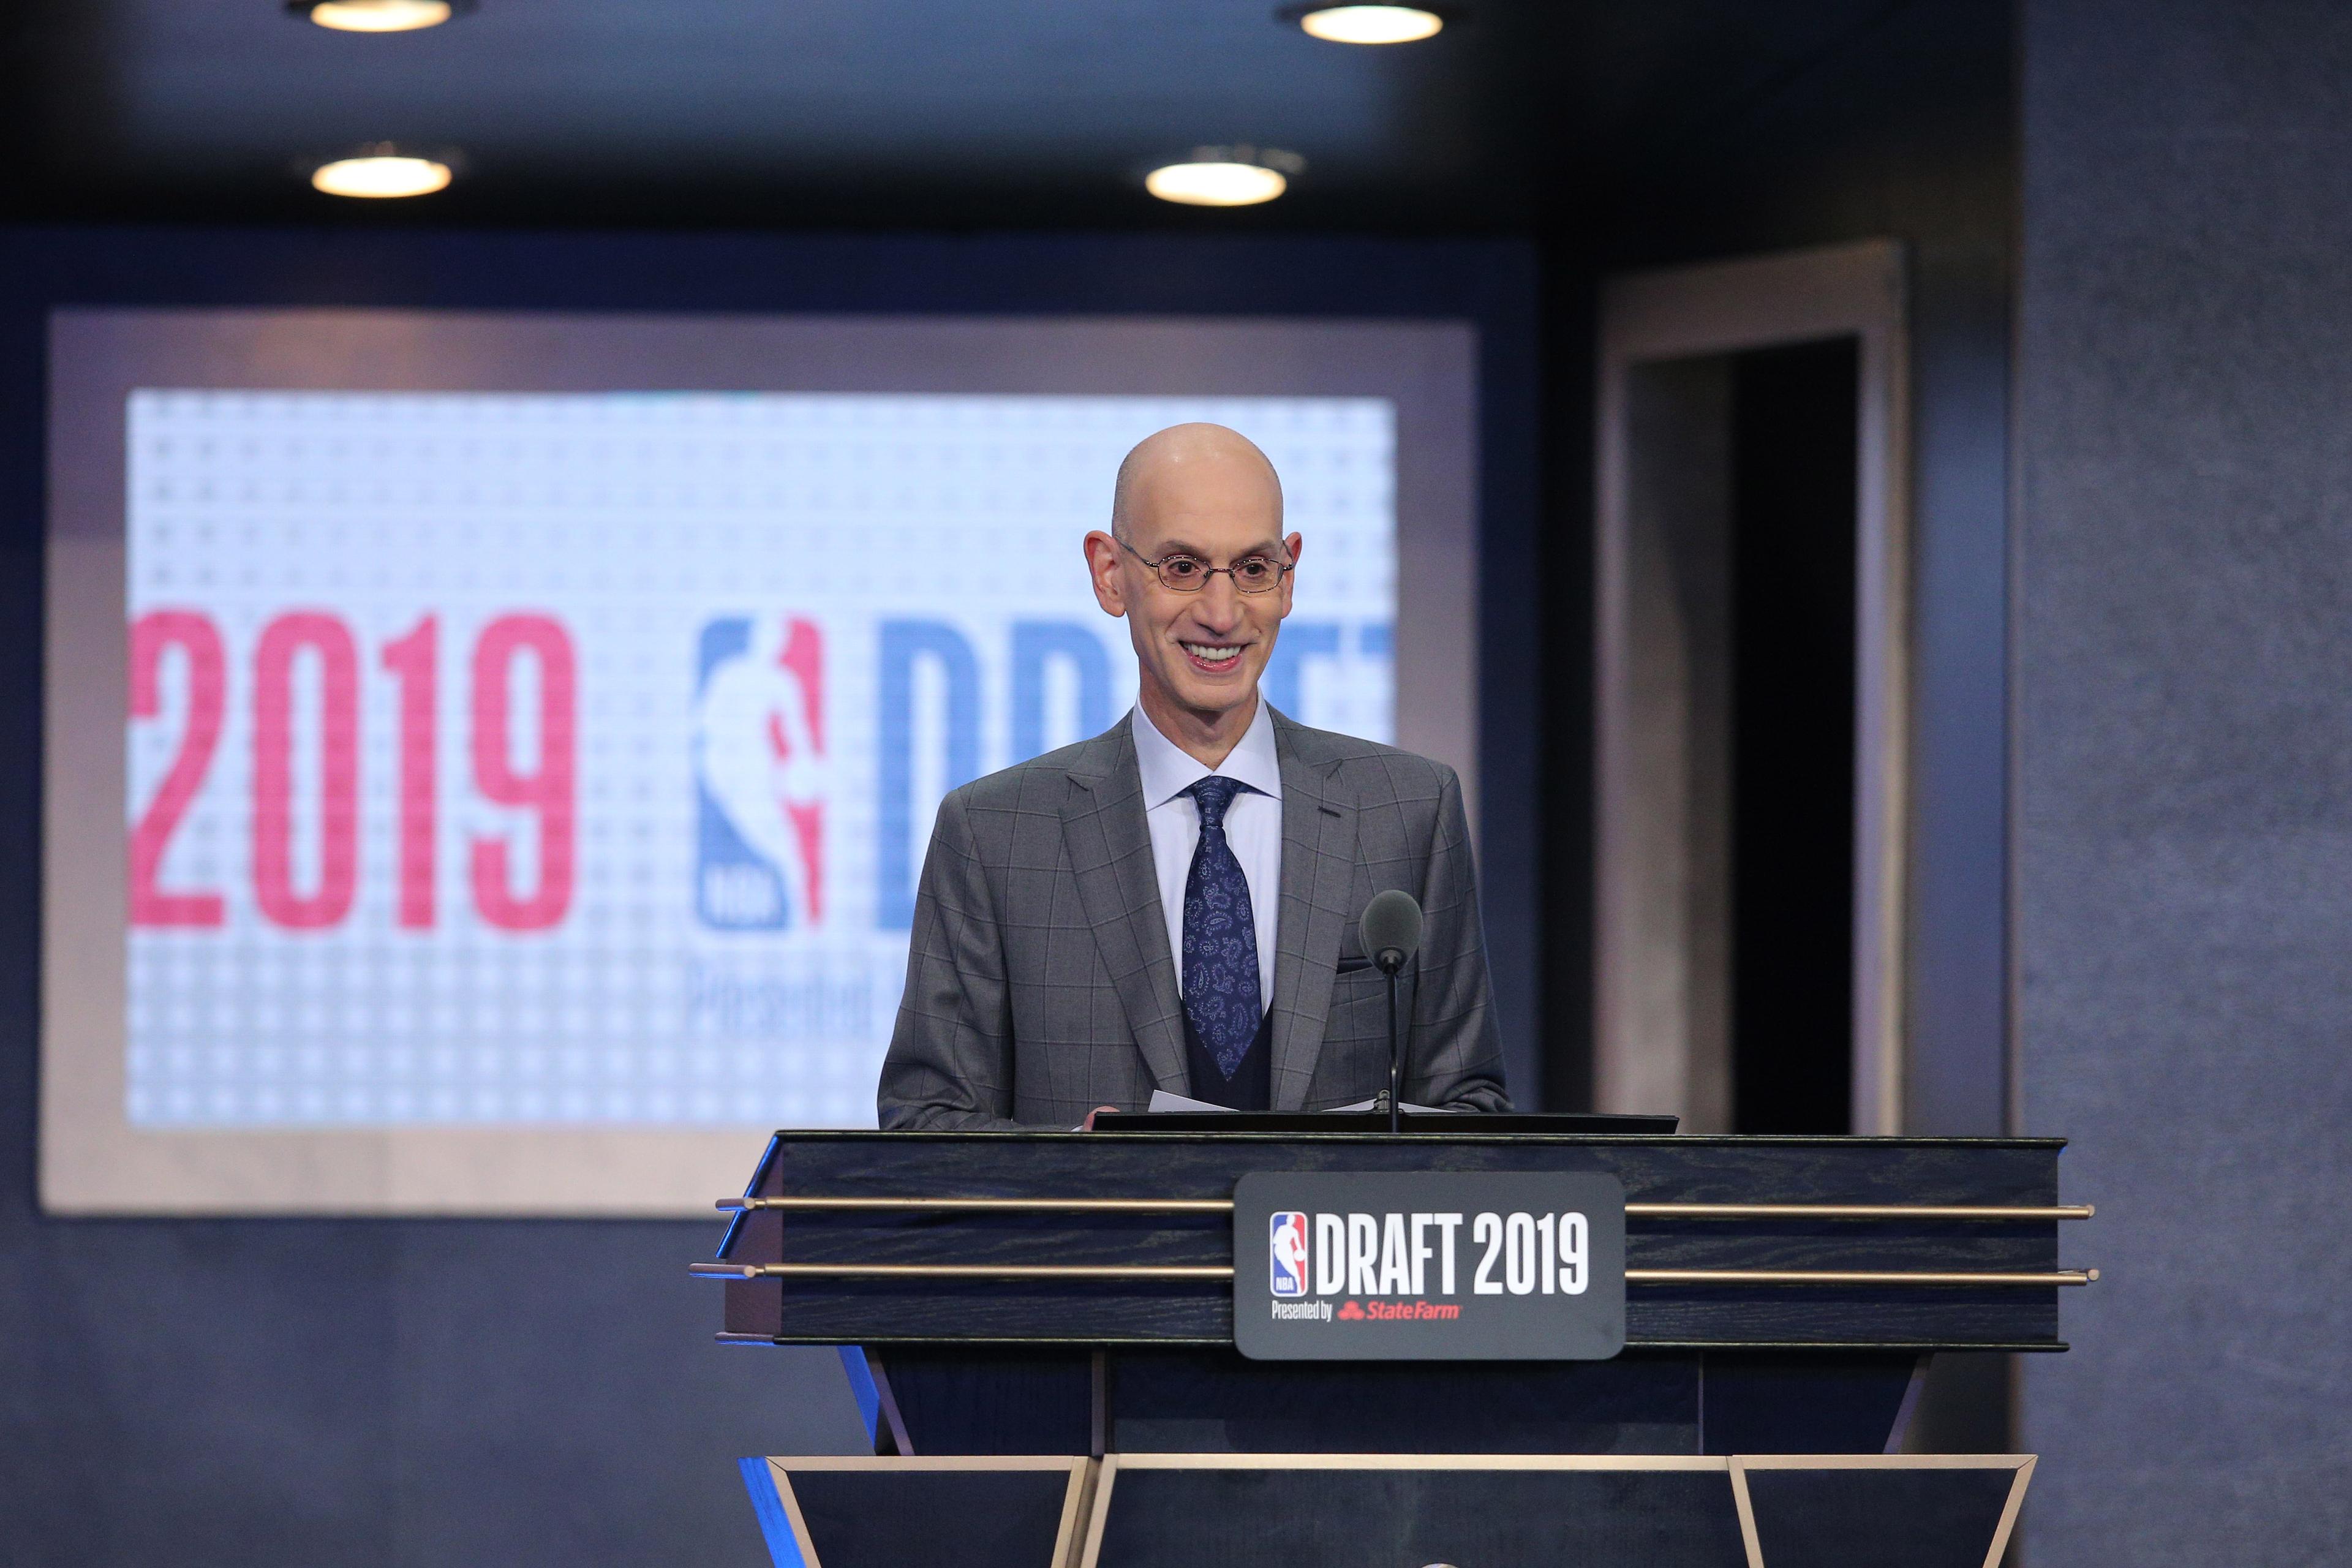 Jun 20, 2019; Brooklyn, NY, USA; NBA commissioner Adam Silver talks prior to introducing the first pick of the first round of the 2019 NBA Draft at Barclays Center. Mandatory Credit: Brad Penner-USA TODAY Sports / © Brad Penner-USA TODAY Sports